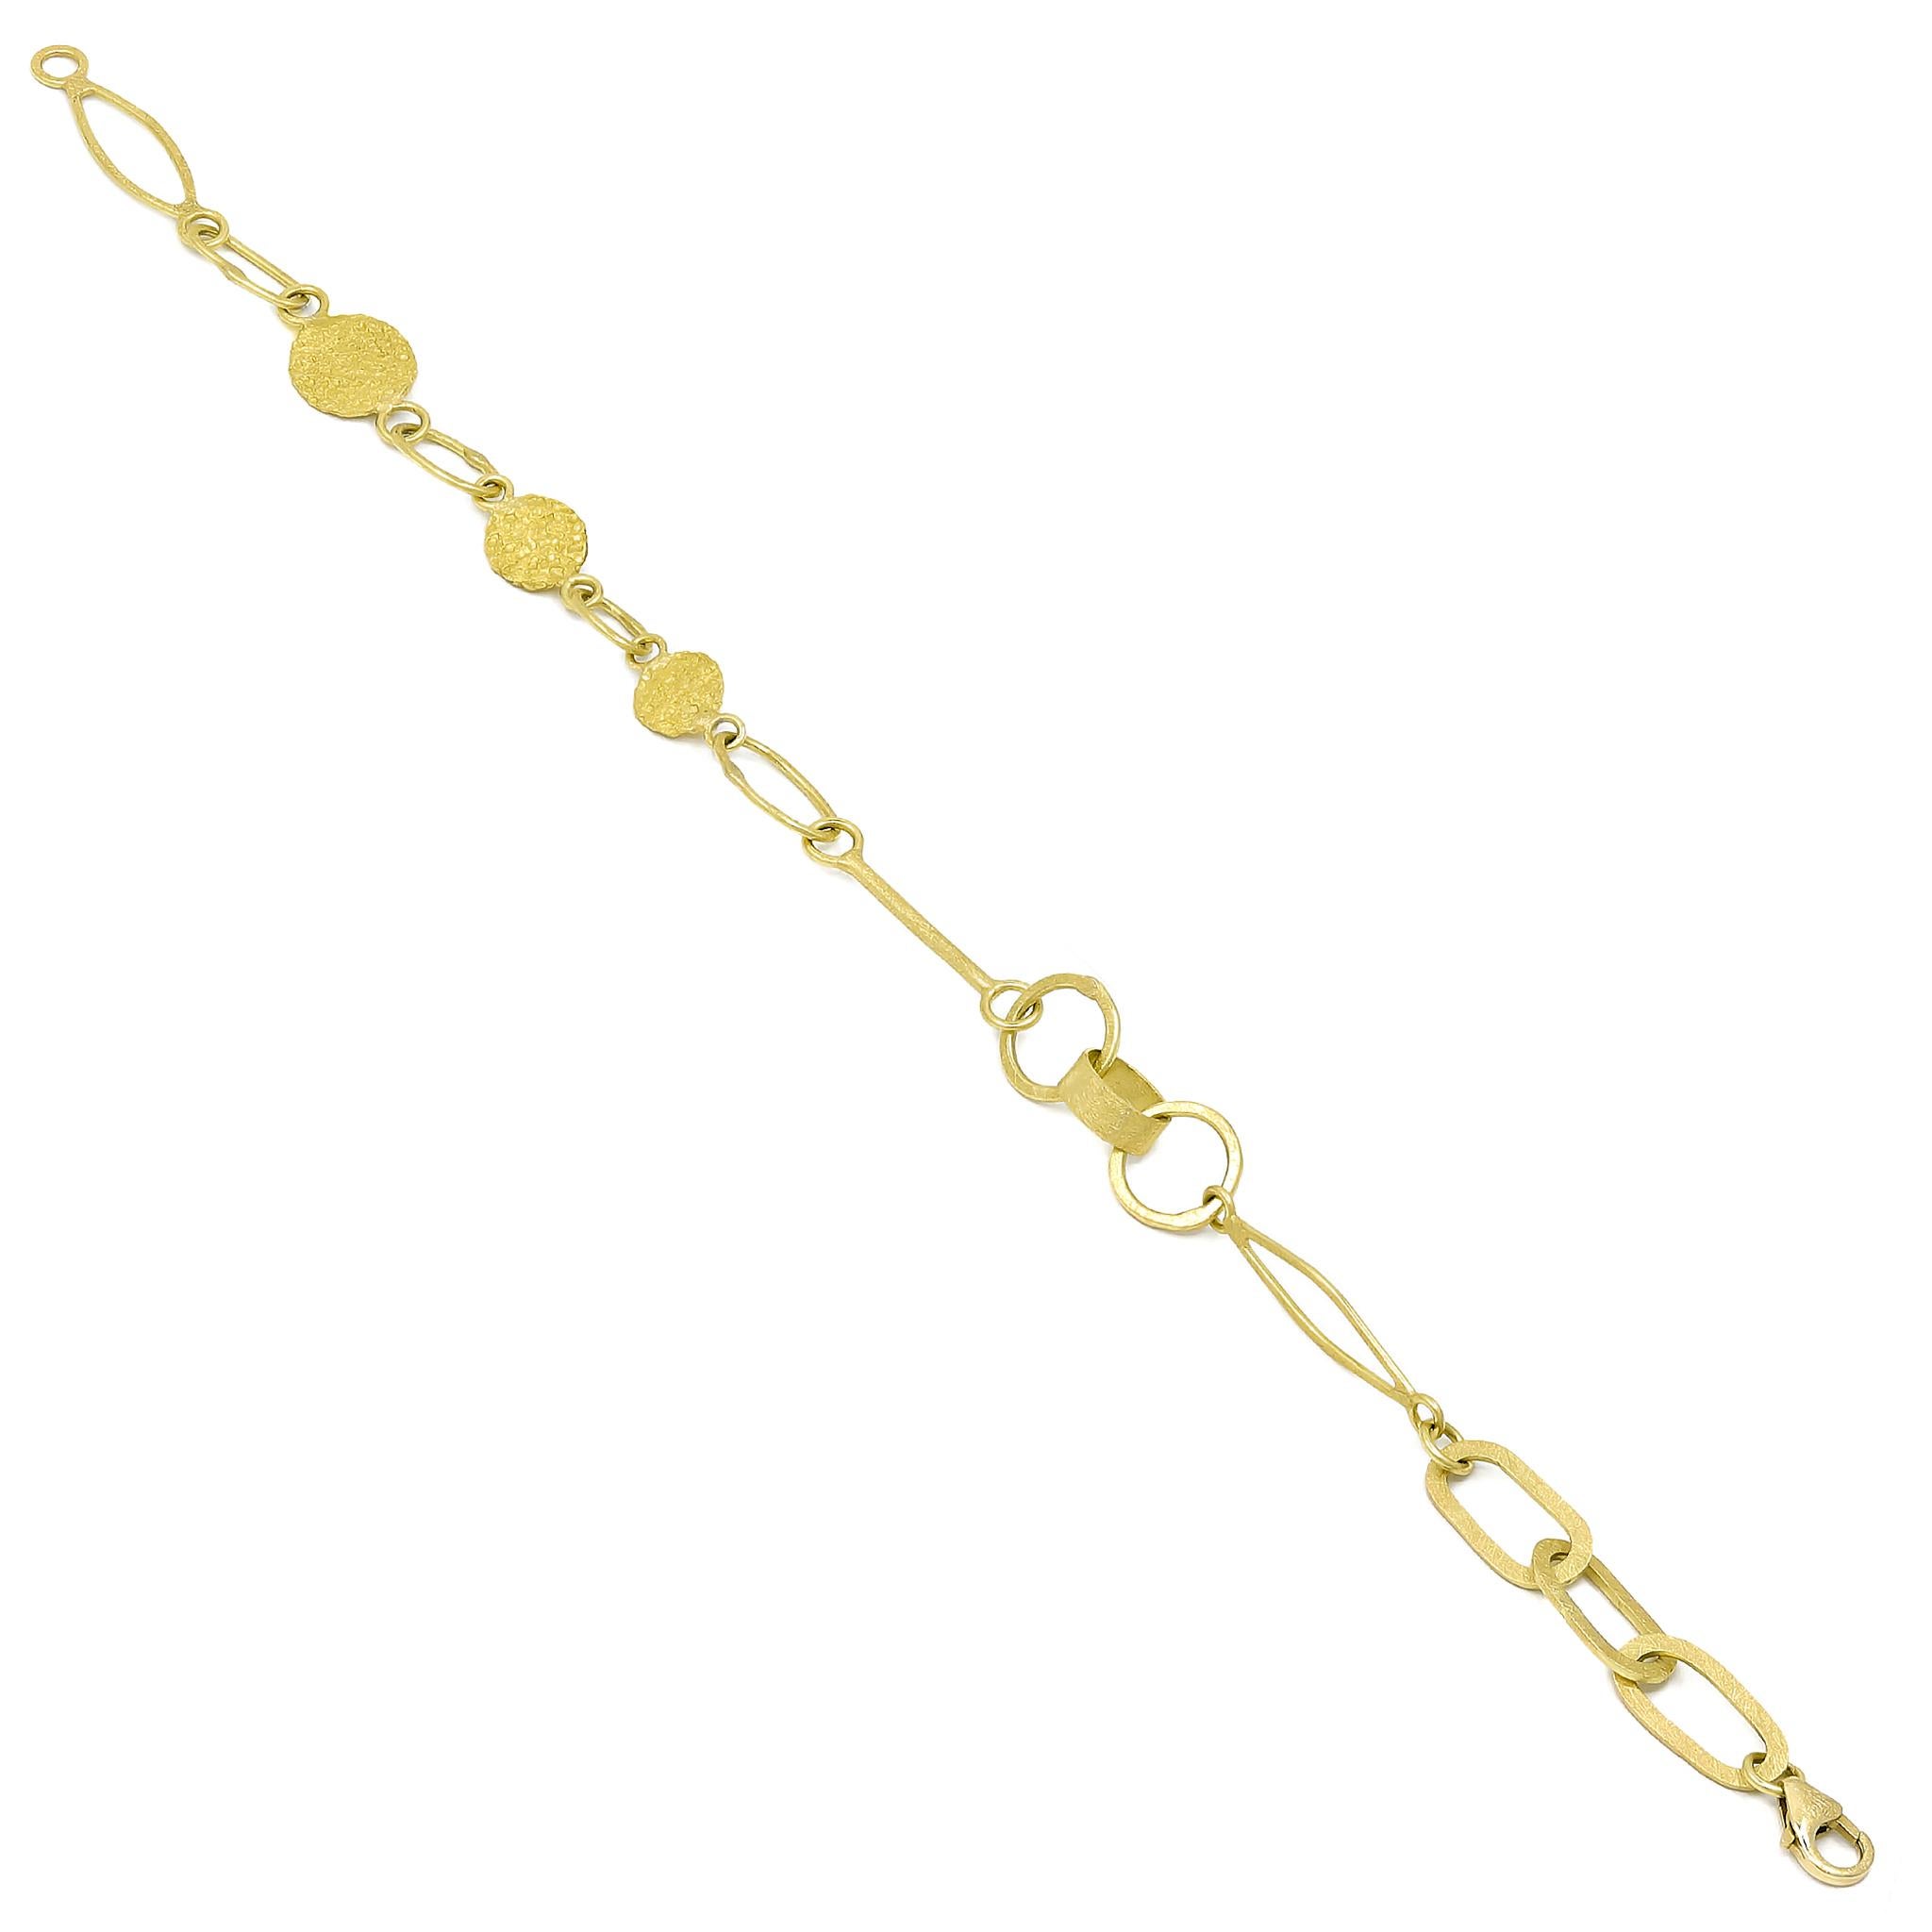 Mix 'n Mingle Chain Bracelet hand-fabricated by jewelry maker Petra Class featuring a spectacular assortment of the artist's signature 18k yellow gold and 22k yellow gold links intricately laid out and connected to optimize versatile wear. The